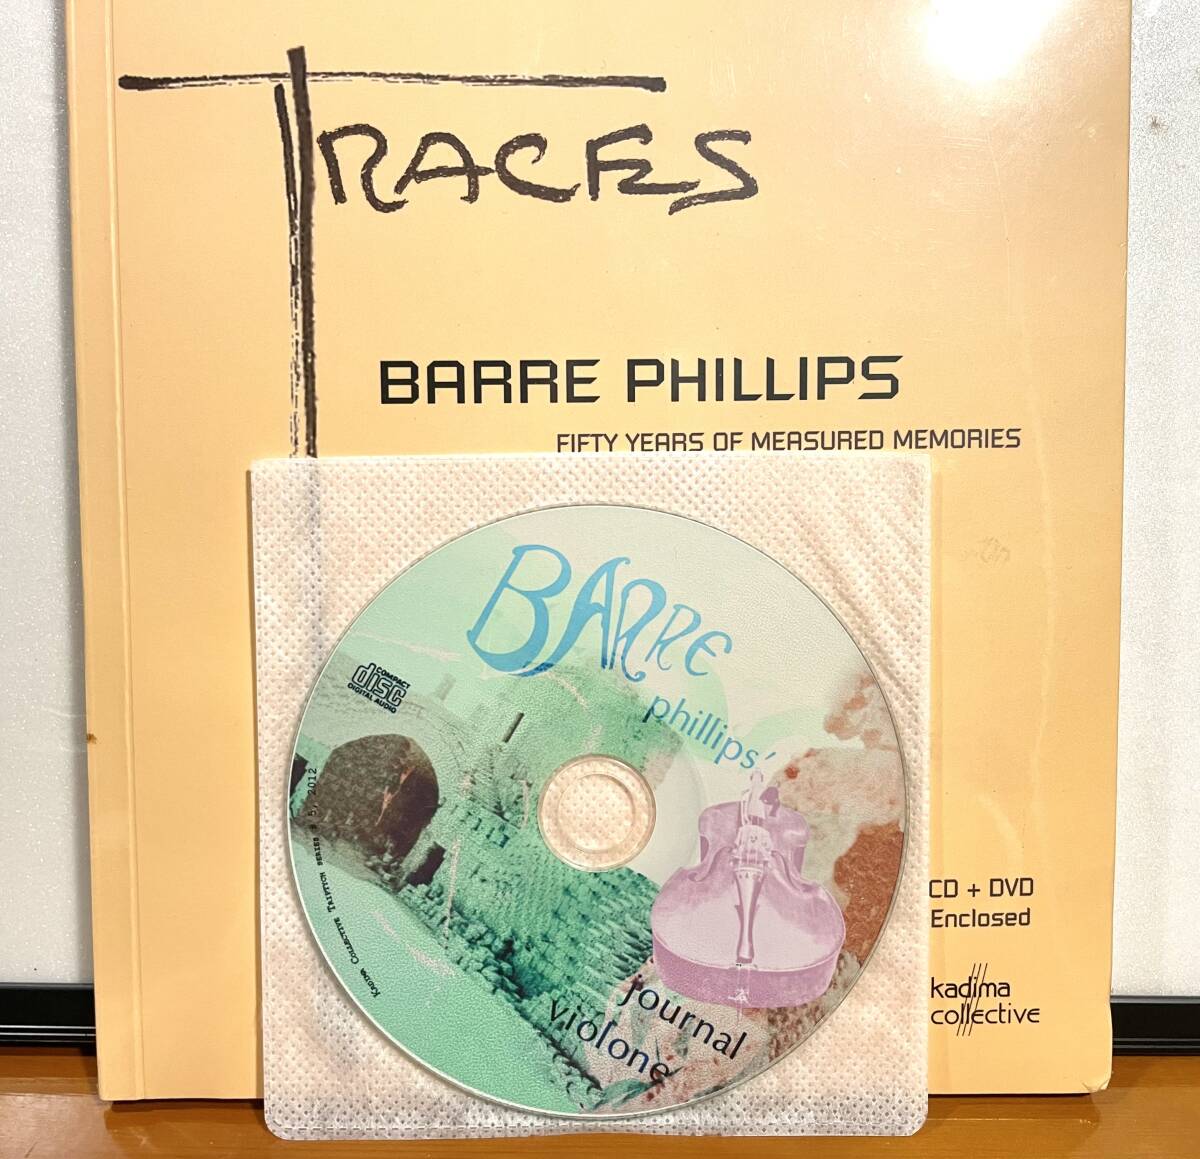 BARRE PHILLIPS / バール・フィリップス／Traces - Fifty years of measured memories(CD-R+DVD-R) 「JOURNAL VIOLONE」新品　完全限定盤_画像1